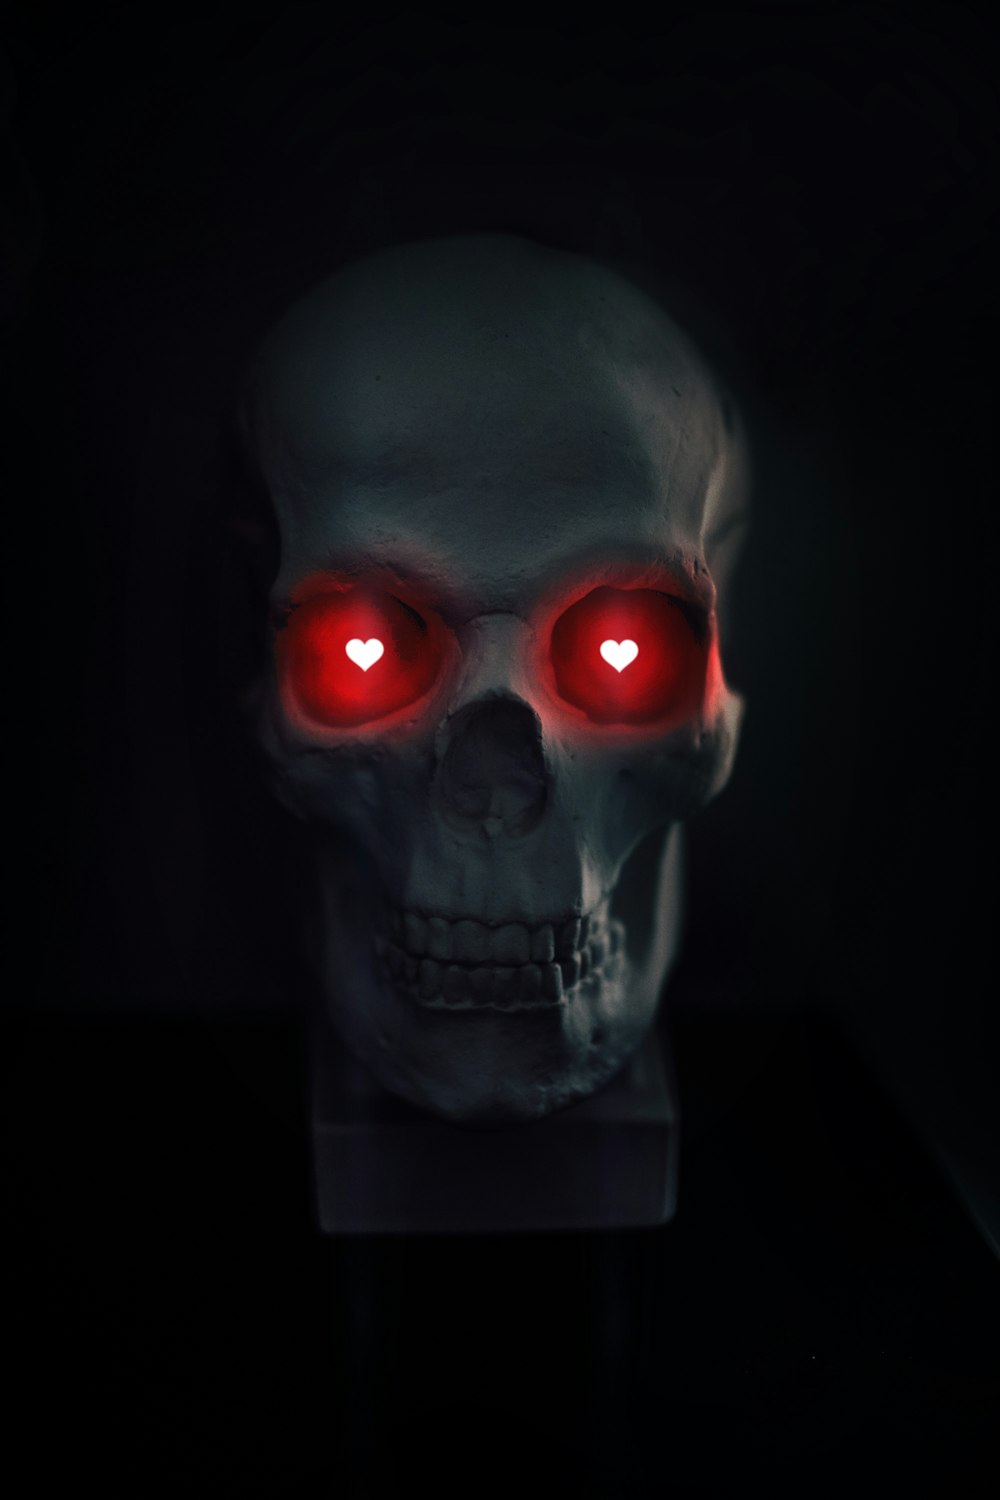 gray skull with red eyes